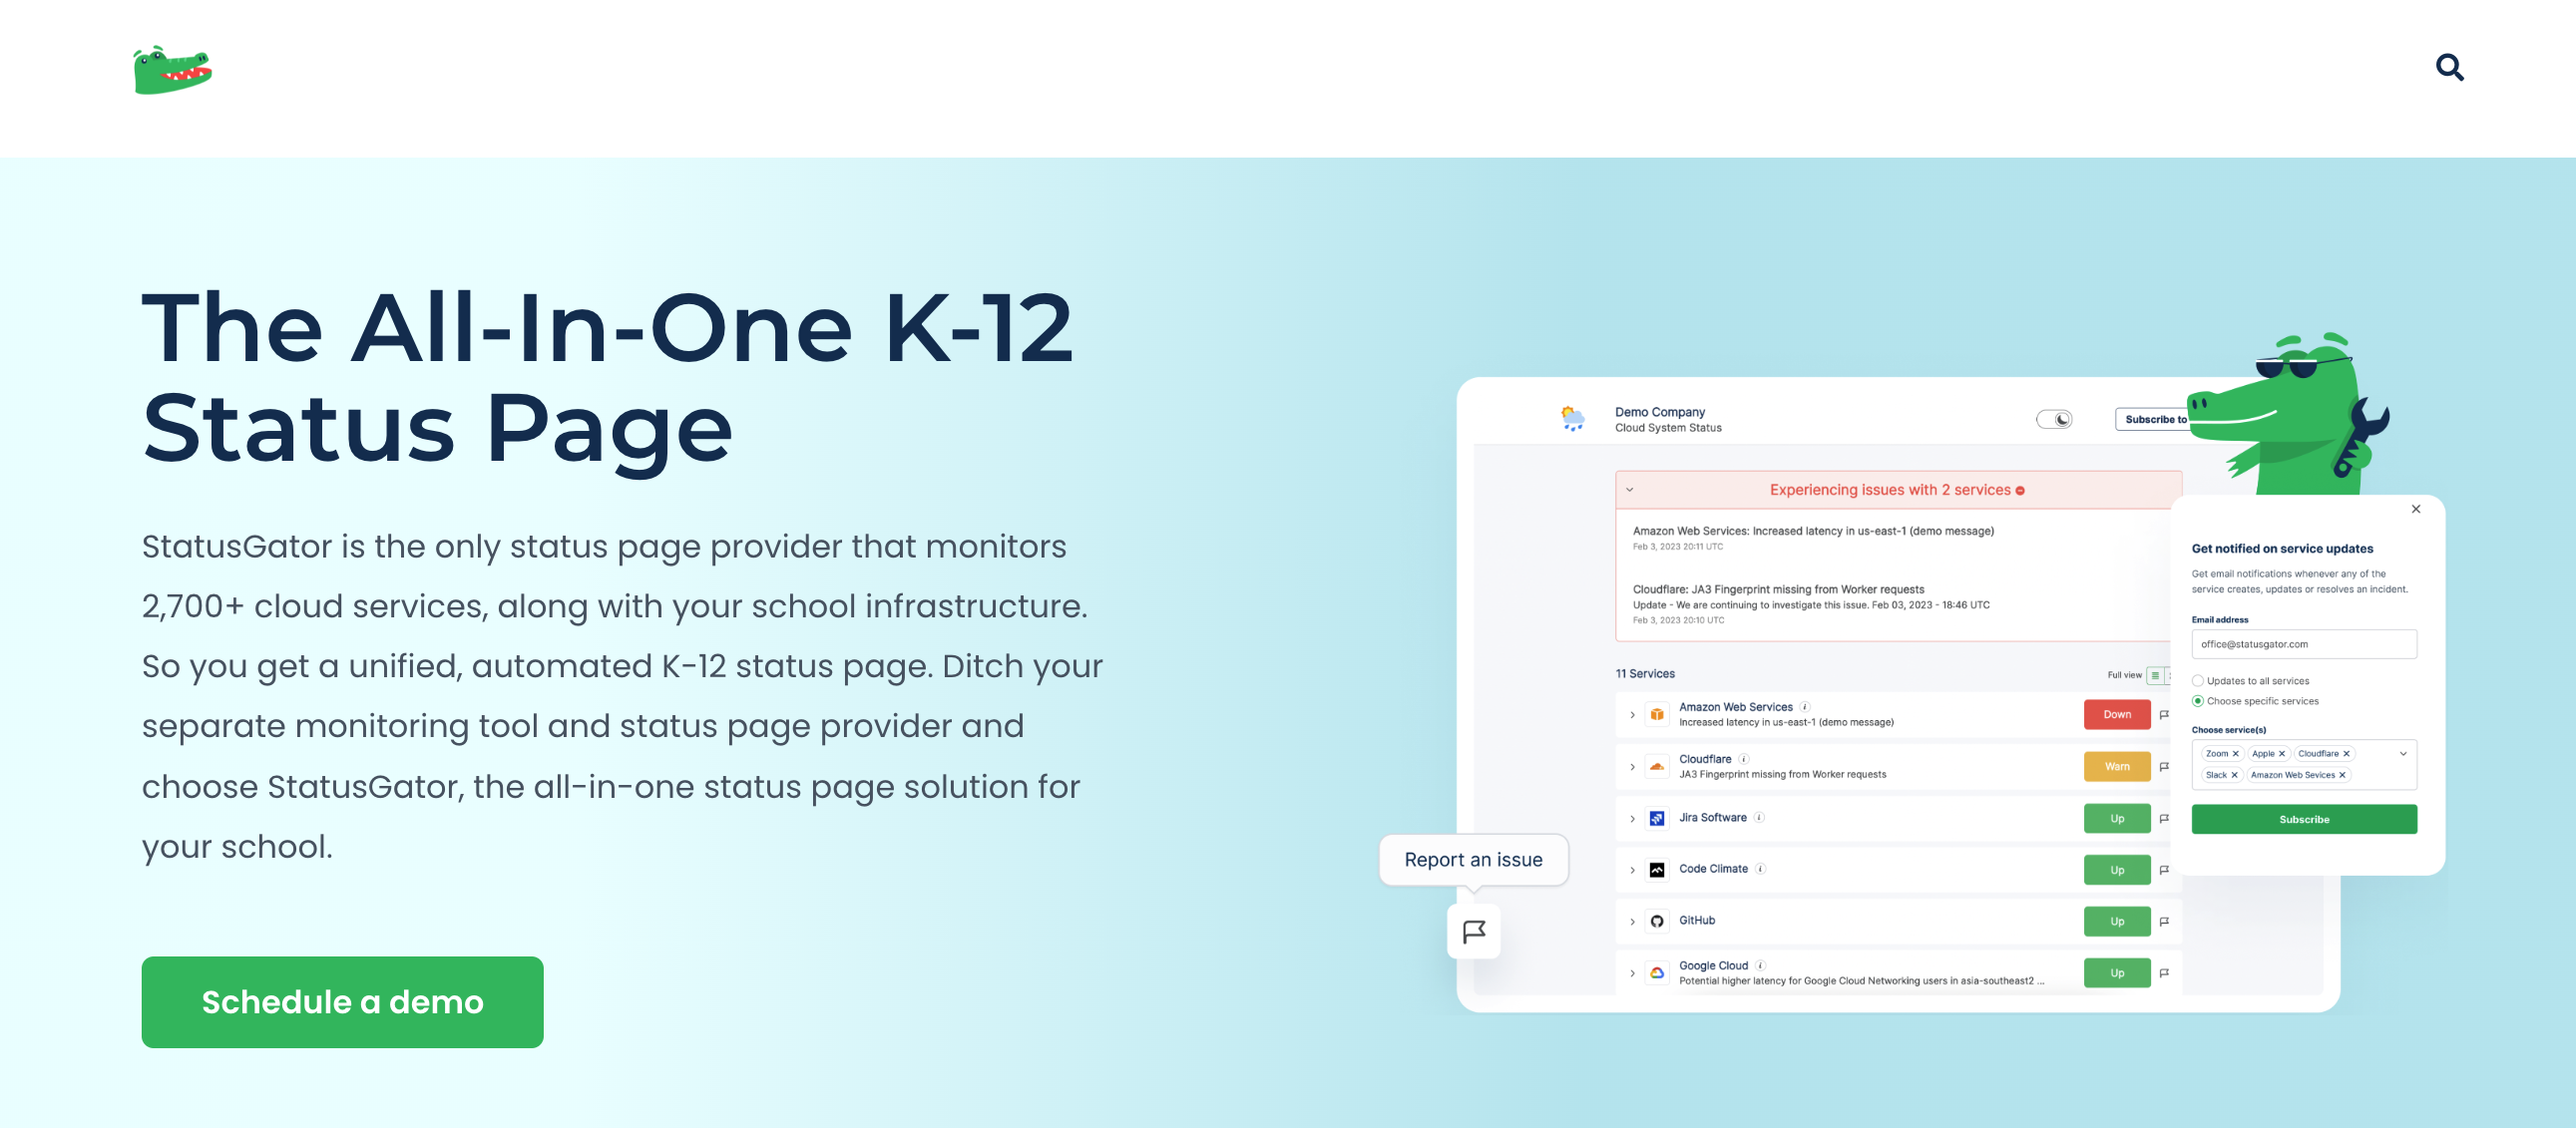 K-12 status page page by StatusGator tools for K12 sys admins